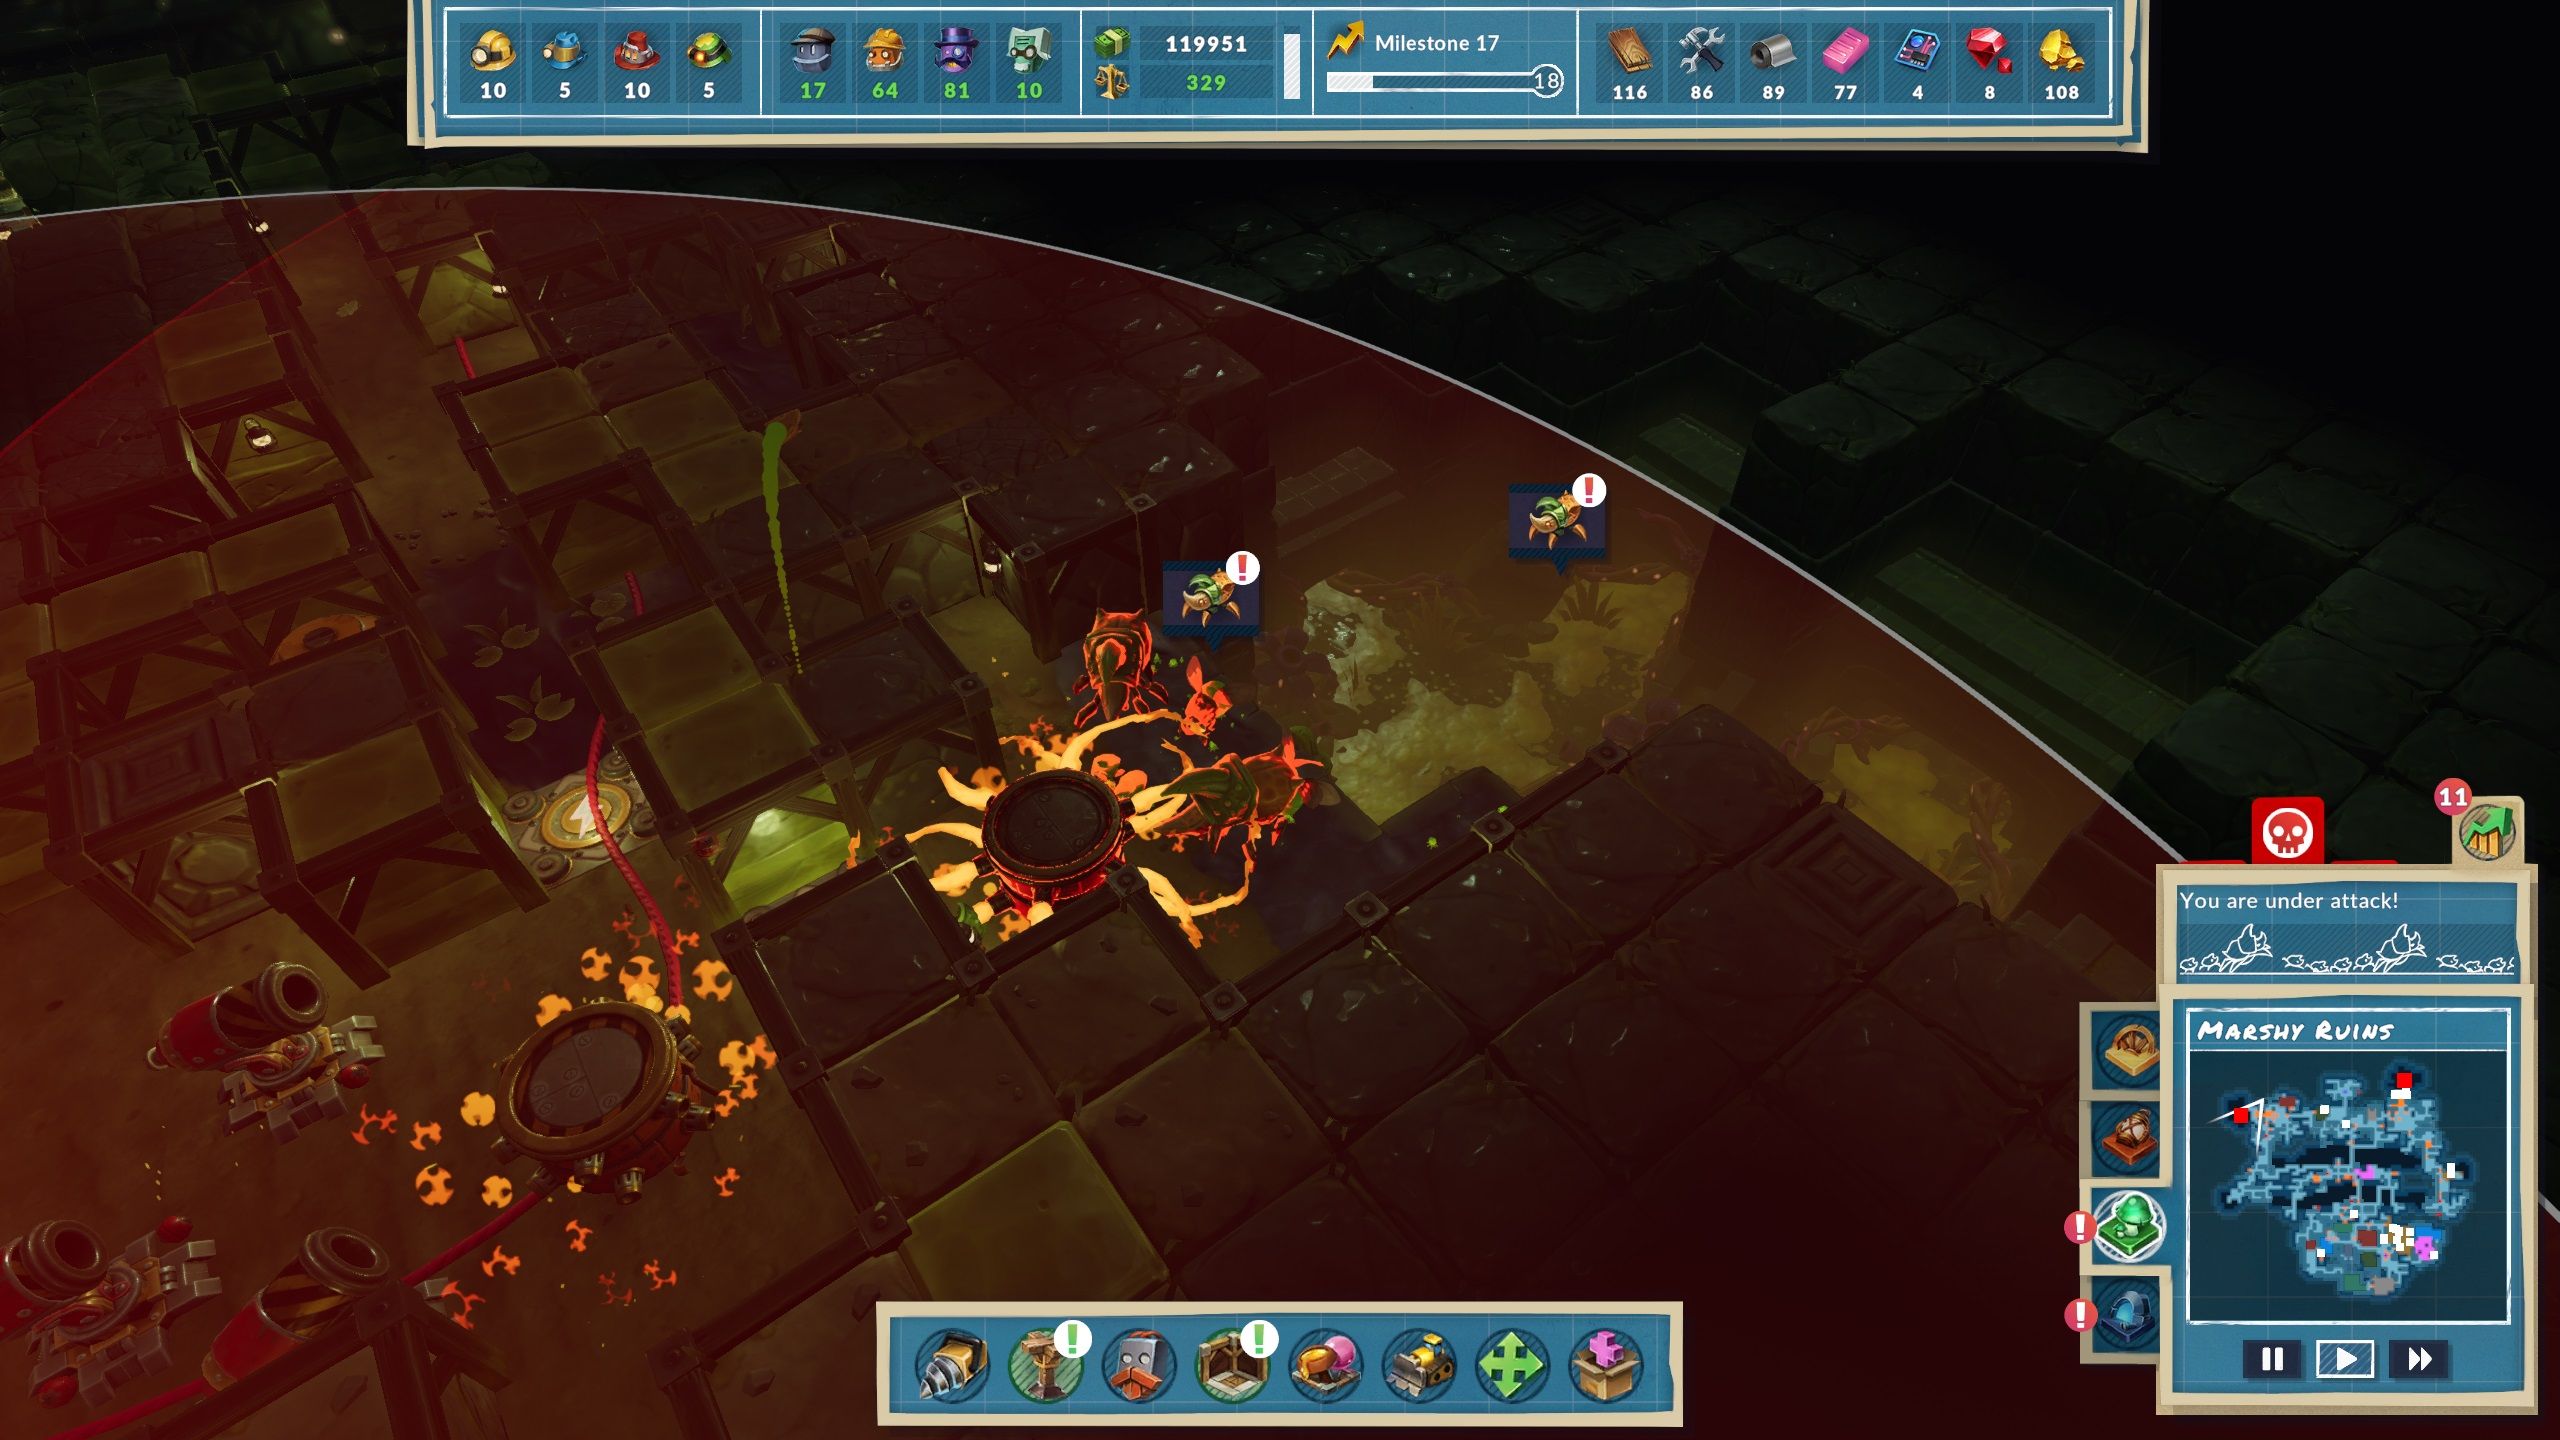 An active Hive sending enemies to attack. They're being set ablaze by the Flame Turret